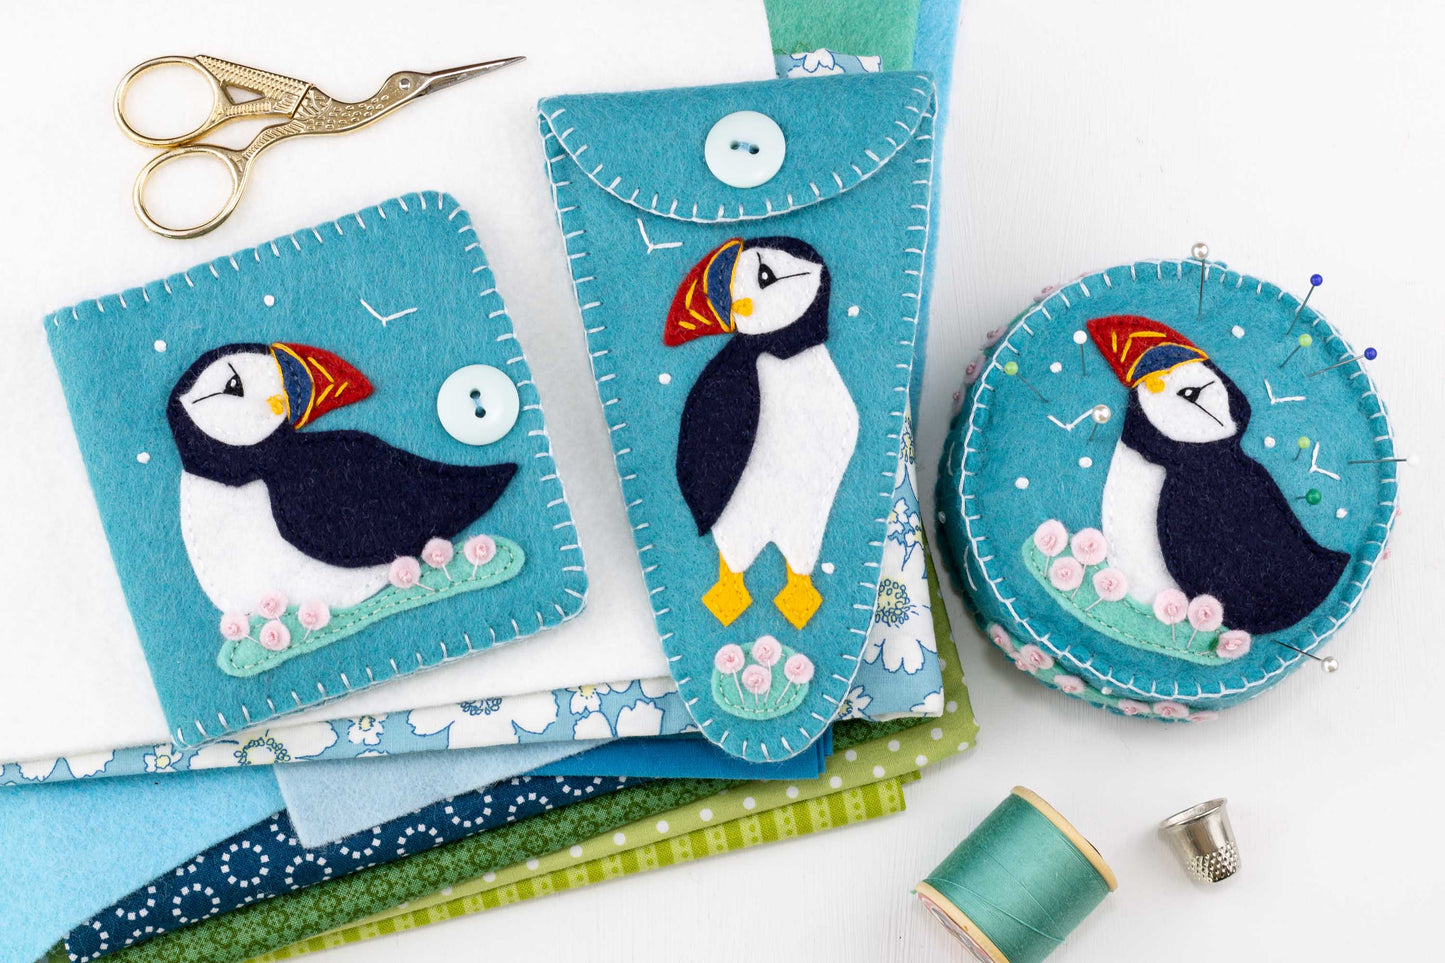 Puffin Needle Case